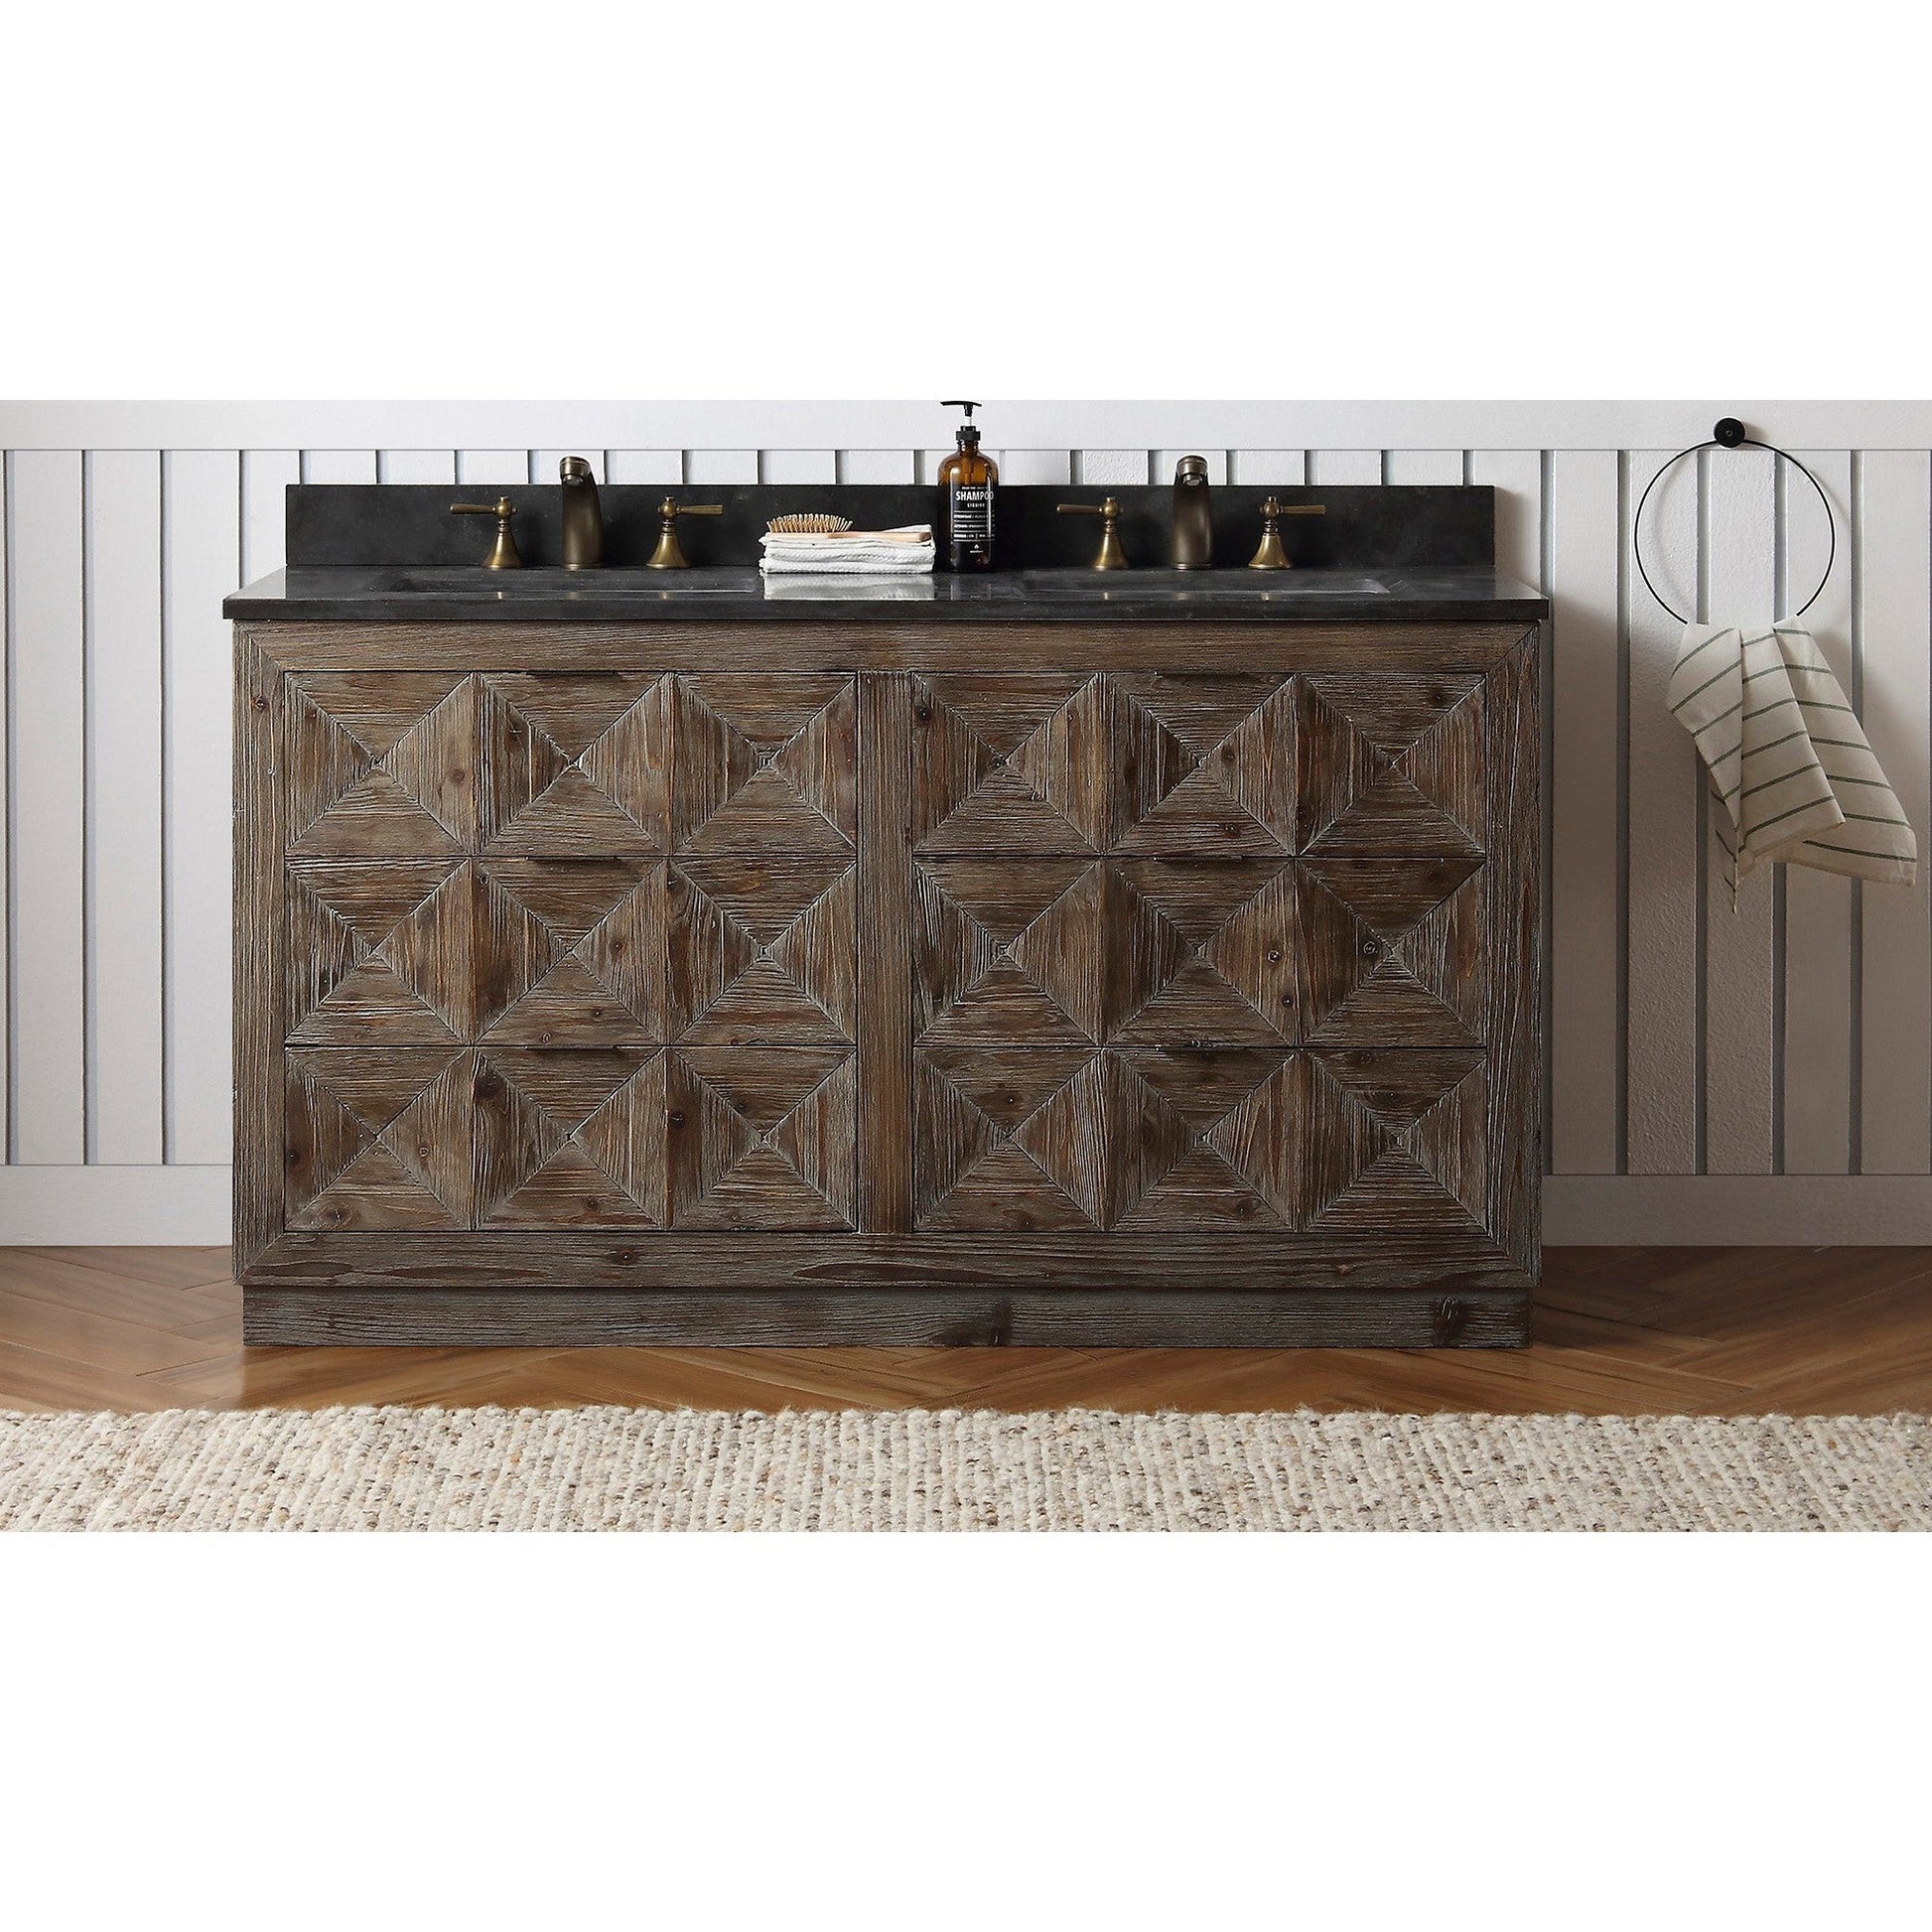 Legion Furniture WH8760 60" Brown Rustic Freestanding Vanity With Moon Stone Marble Top, Backsplash and Double White Ceramic Sink